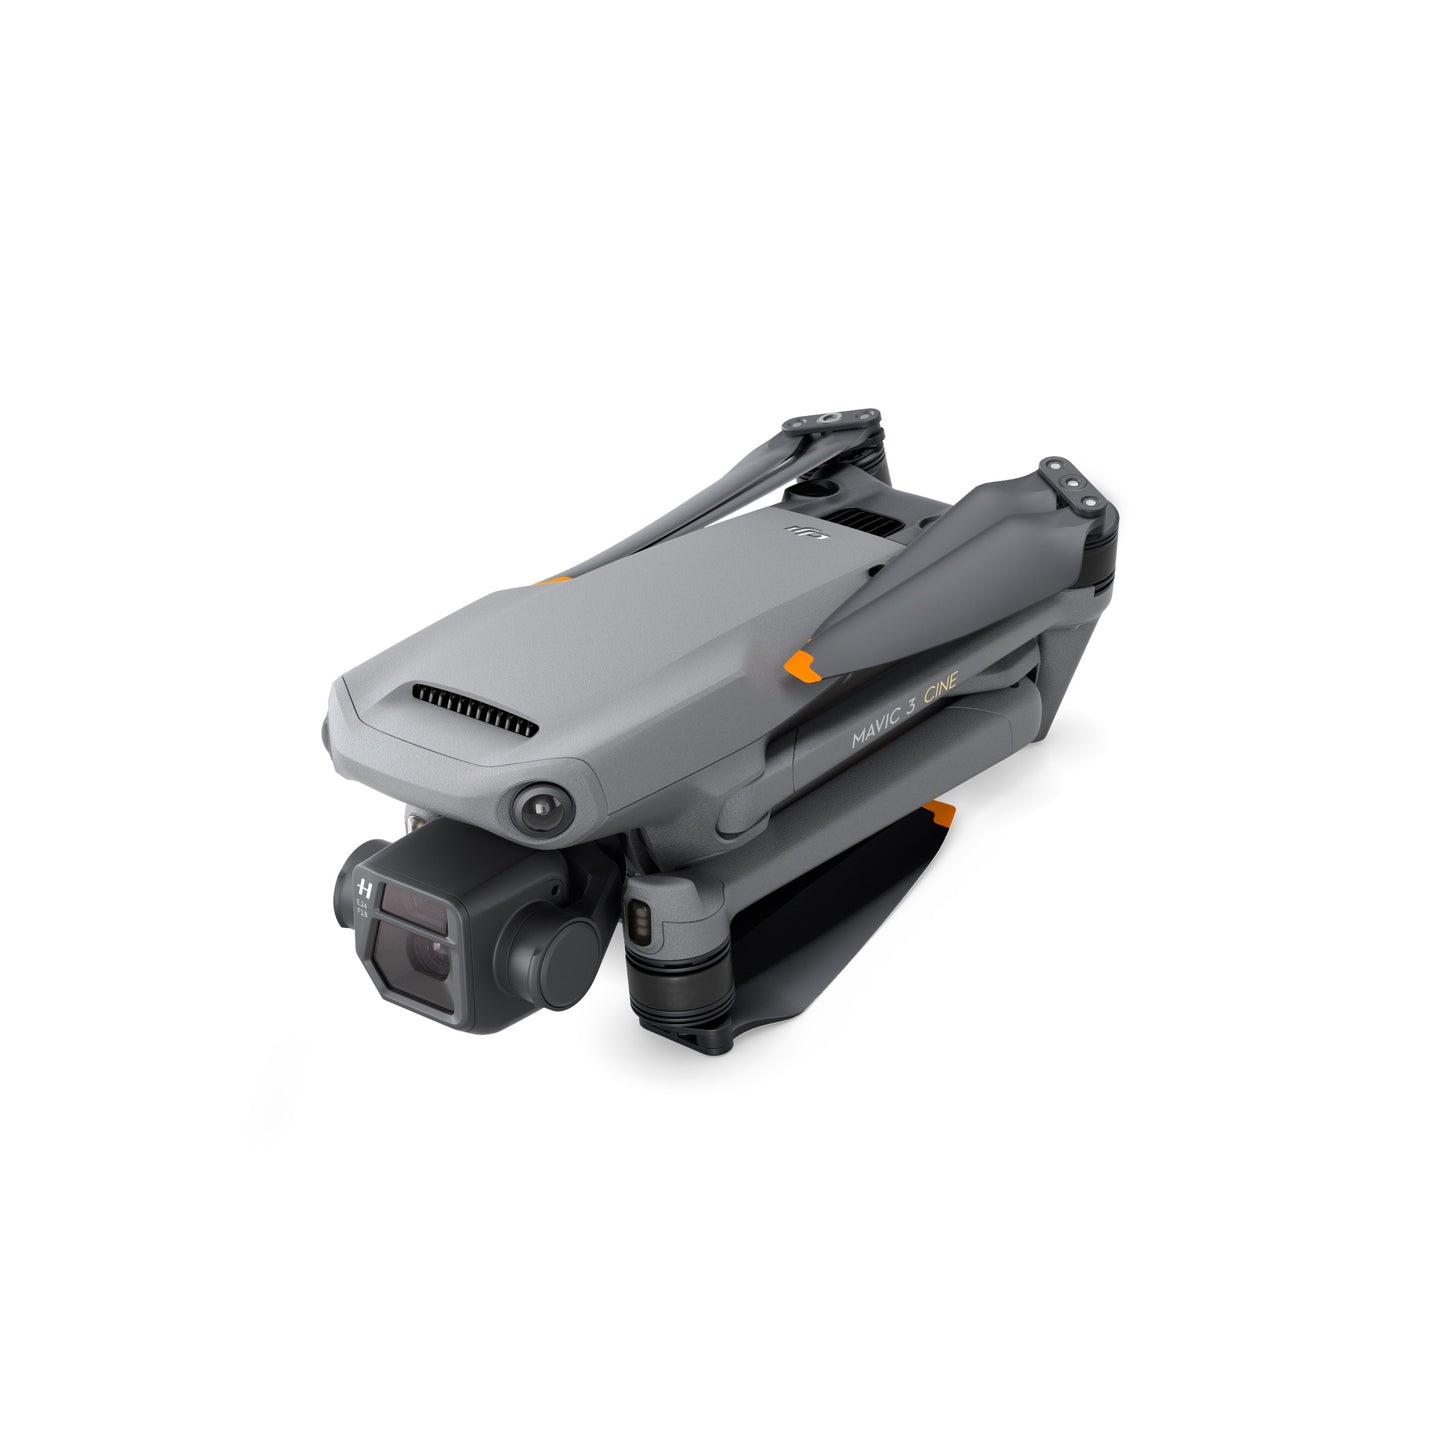 DJI Mavic 3 5.1K/50fps Standard / Fly More / Cine Premium Combo HDR Professional Drone with 46-Minutes Flight Time, Active Track 5.0, Advanced RTH, Ocusync 2.0 and MasterShots Function